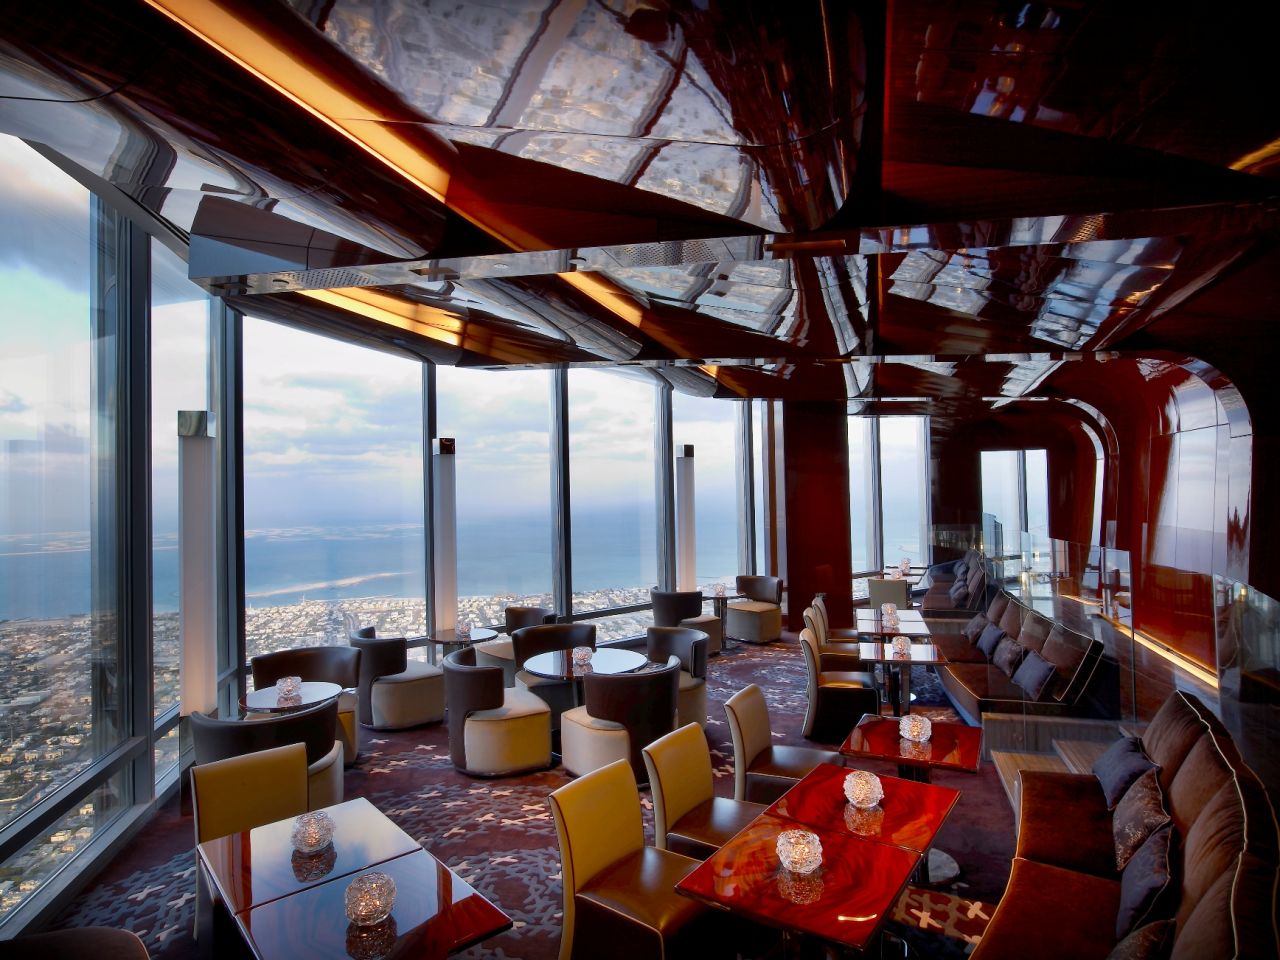 At At.mosphere, the fine dining restaurant on the 122nd floor of the Burj Khalifa, ask for a window seat for incredible sunset views. But you might find it hard to take your eyes off the decadent restaurant's tasting menu ($558 with wine pairings). Private dining also available for up to 16 guests.